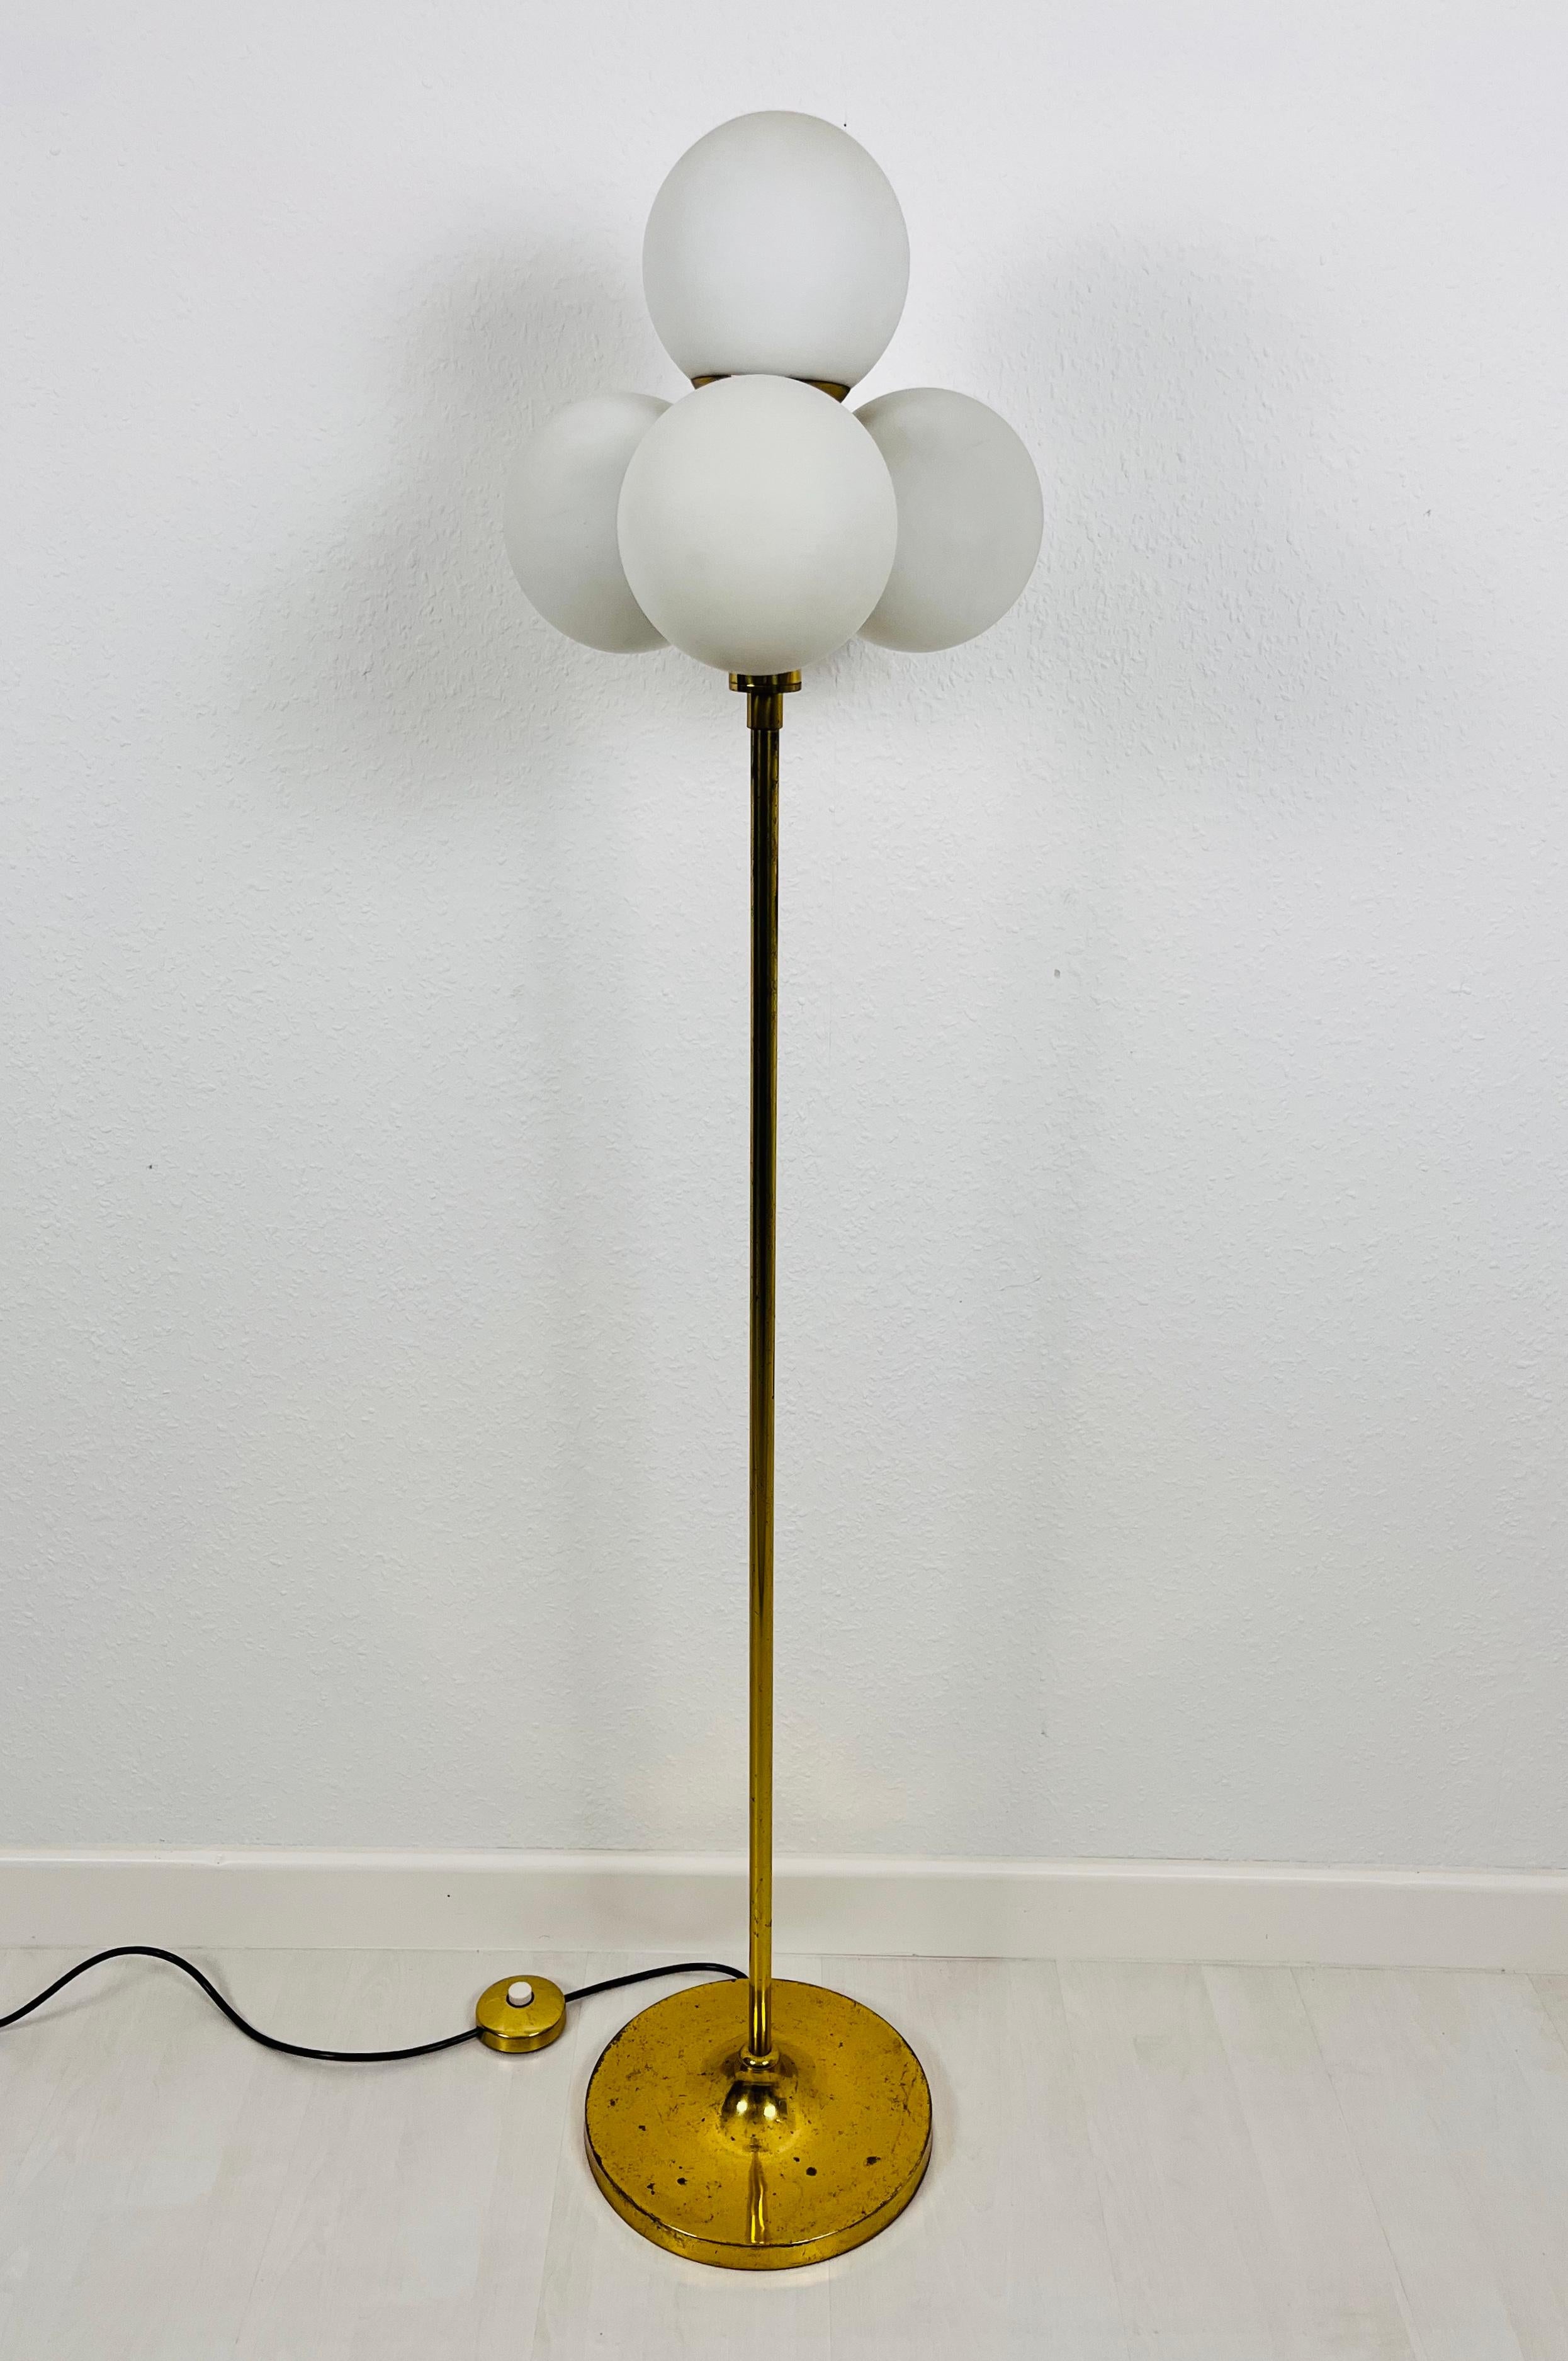 A midcentury floor lamp by Kaiser made in Germany in the 1960s. It is fascinating with its Space Age design and four ball shaped opaque balls. The bottom of the light is made of full brass. The bar is also made of brass including the arms.

Very